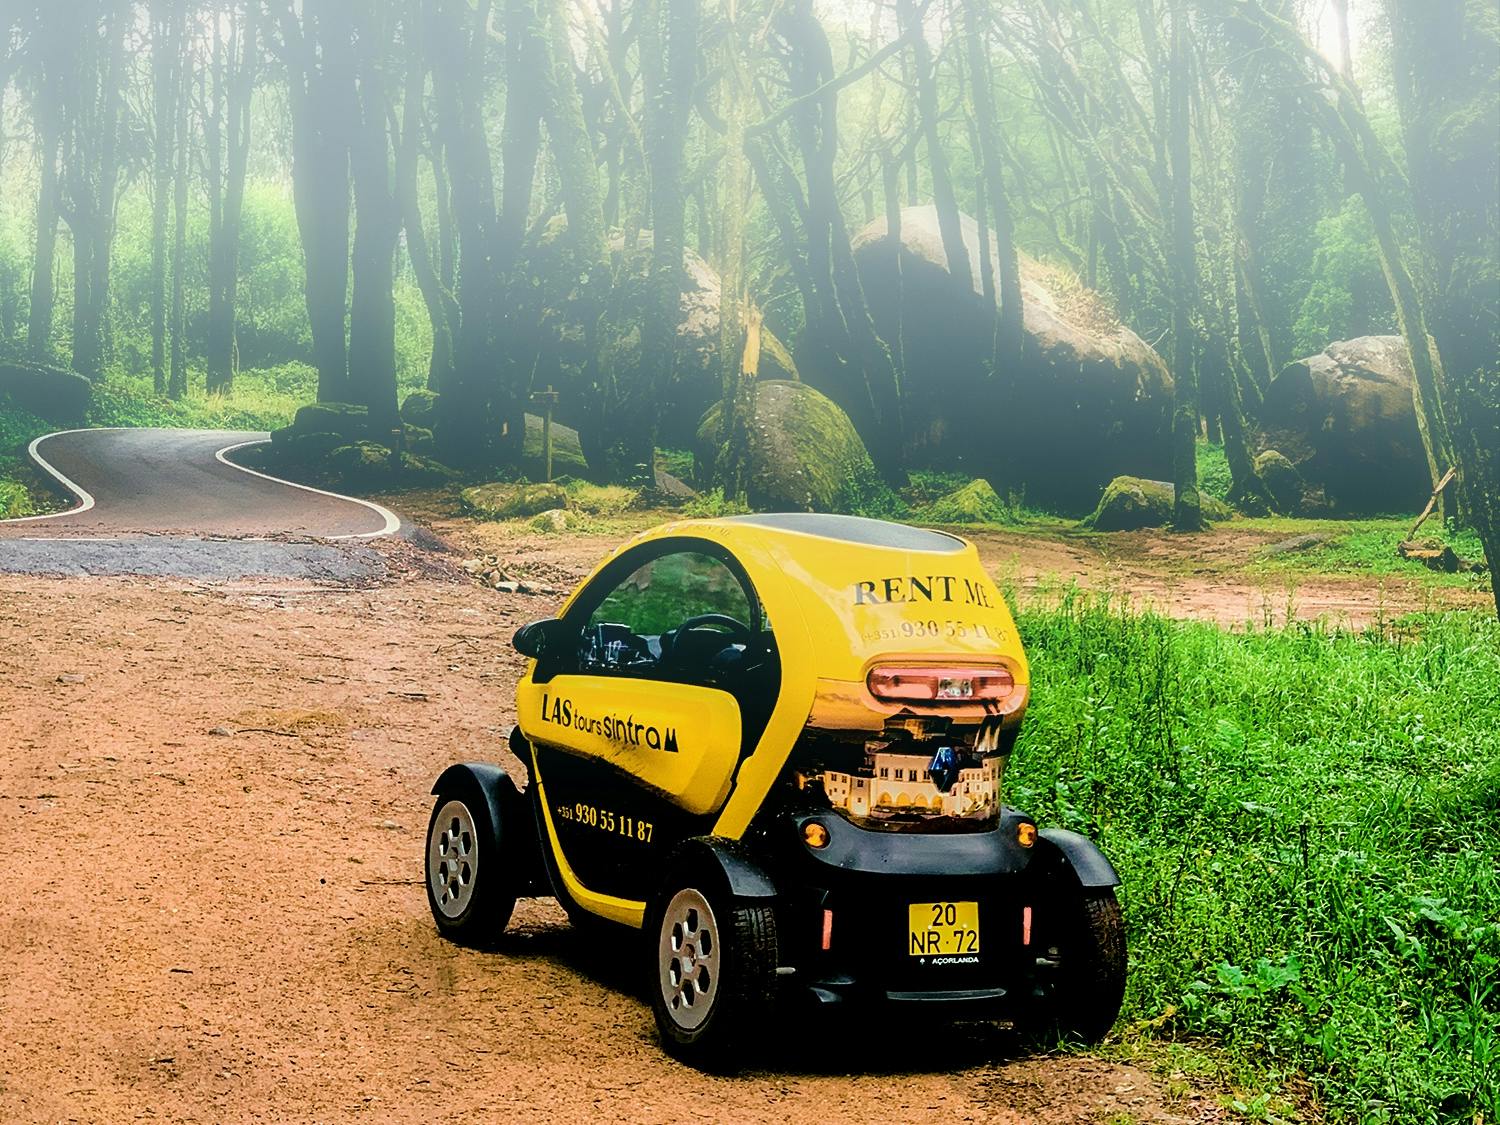 Sintra patrimony and nature electric car tour